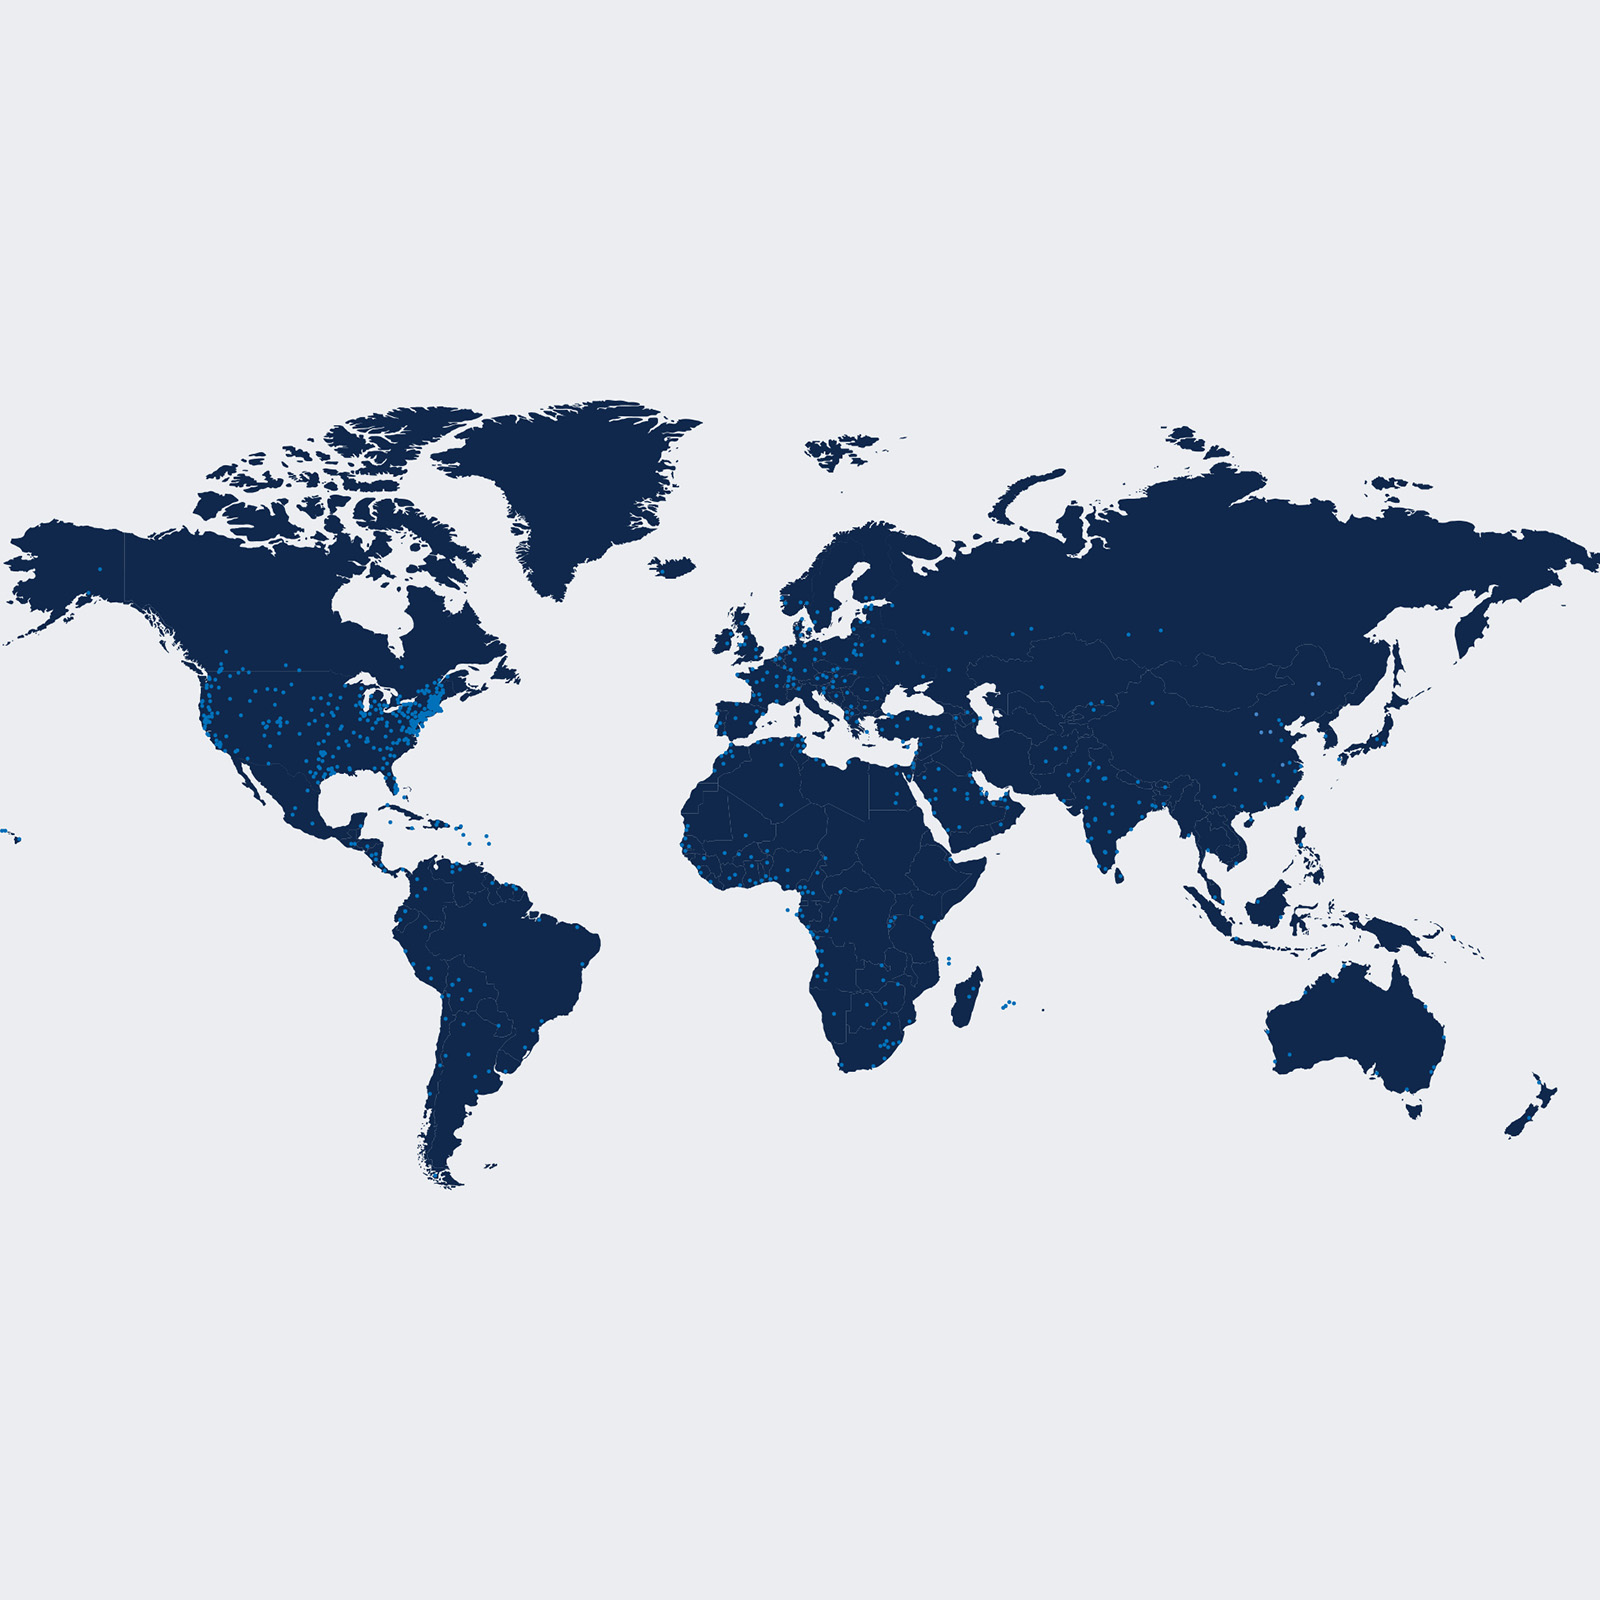 With nearly 1,000 sales and service locations around the world, we’re everywhere you go.